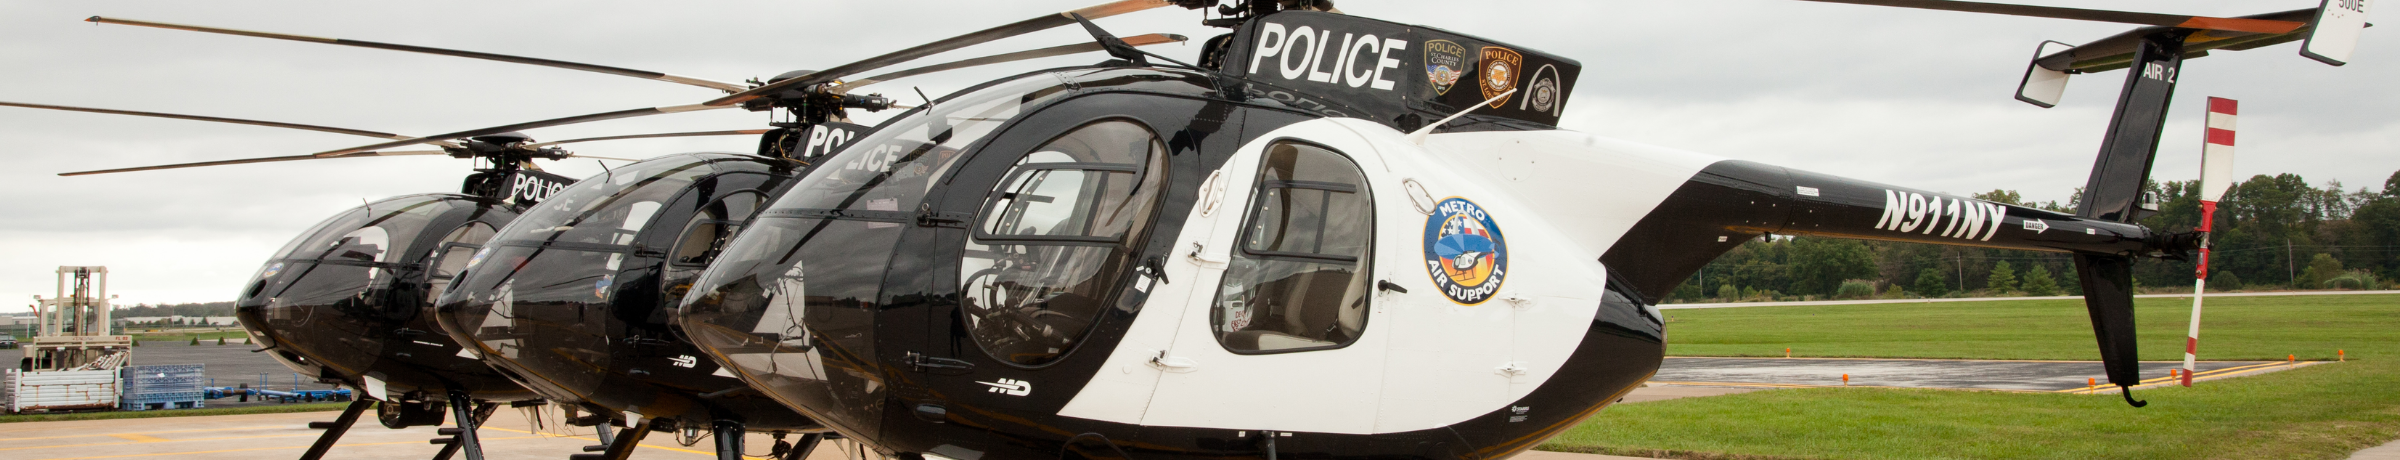 Police Choppers Banner Image